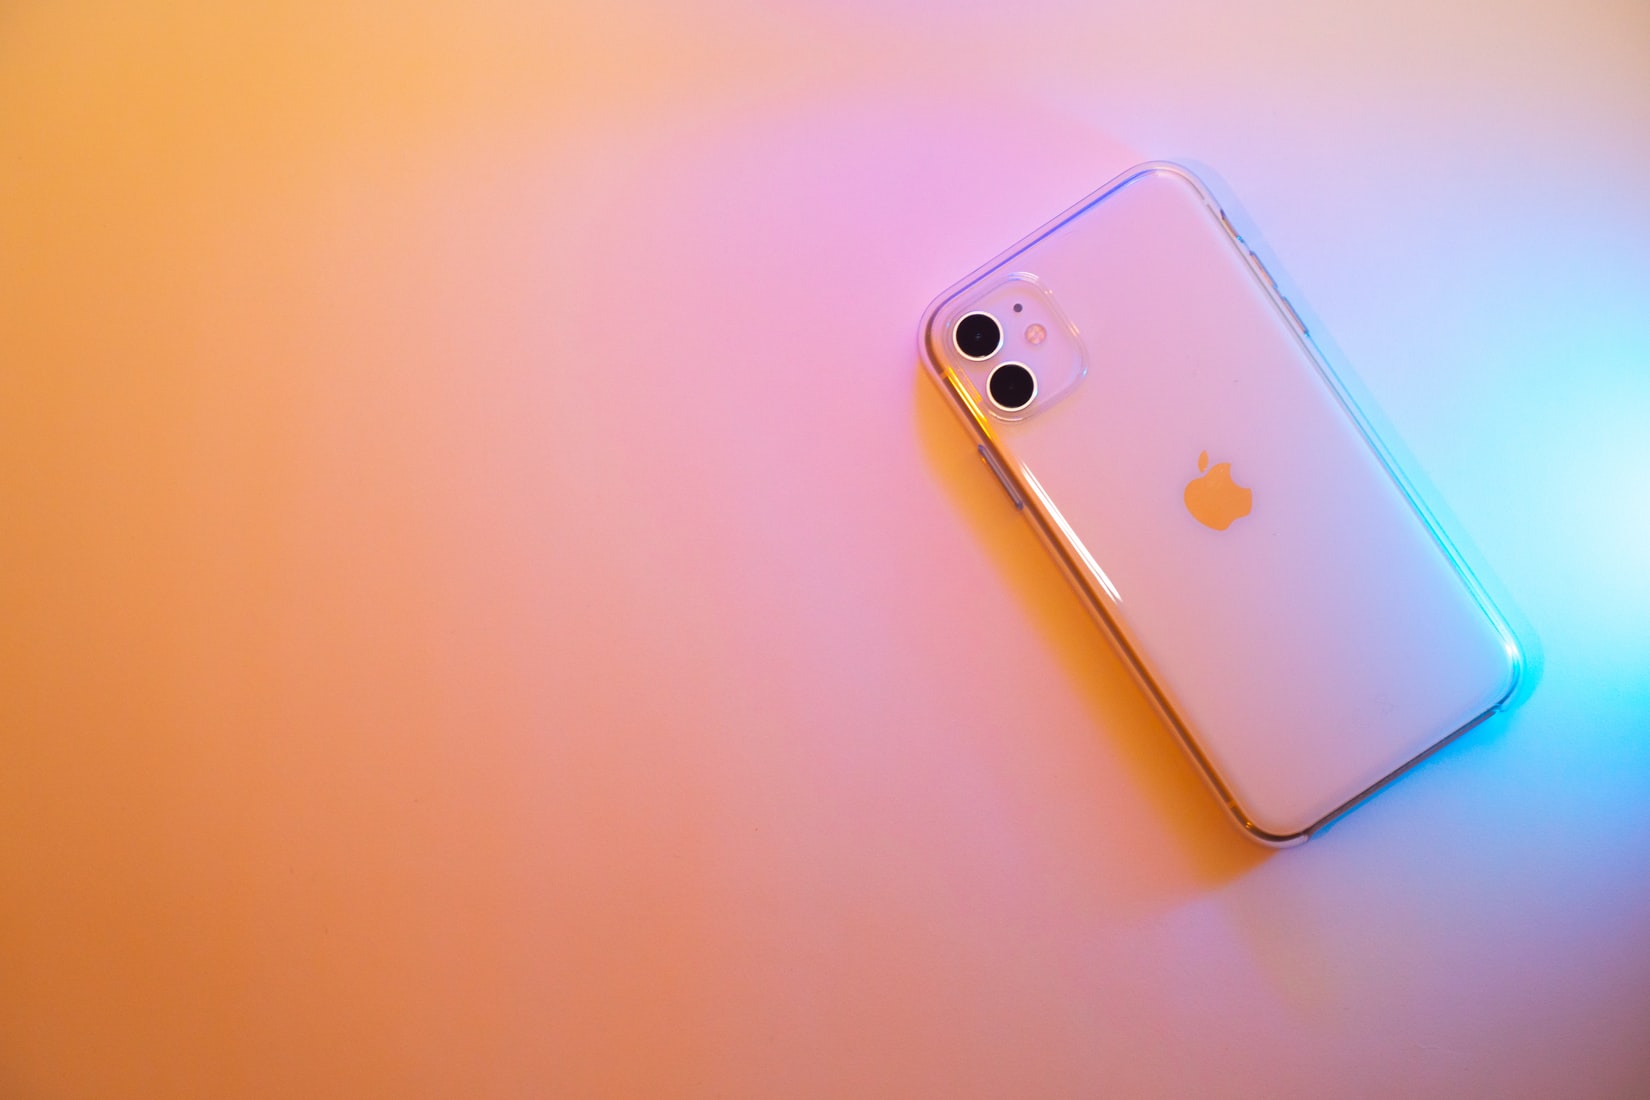 Know the differences between iPhone X and the iPhone 11